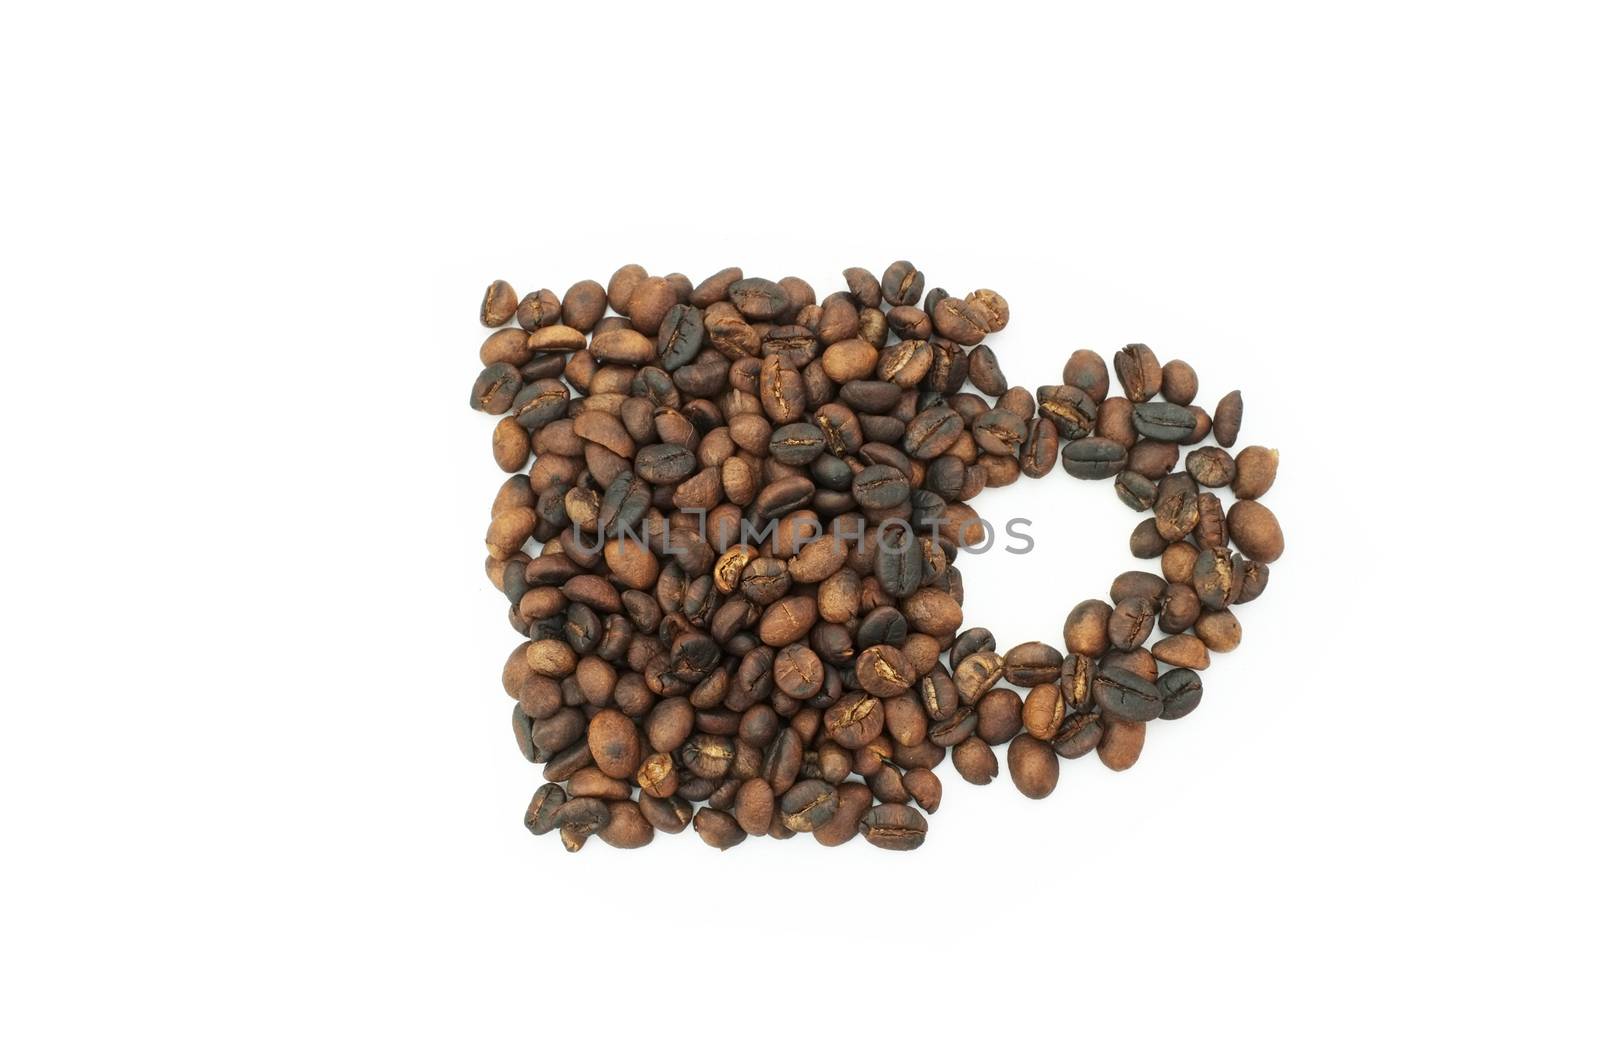 Roasted coffee beans in shape of cup by Hepjam